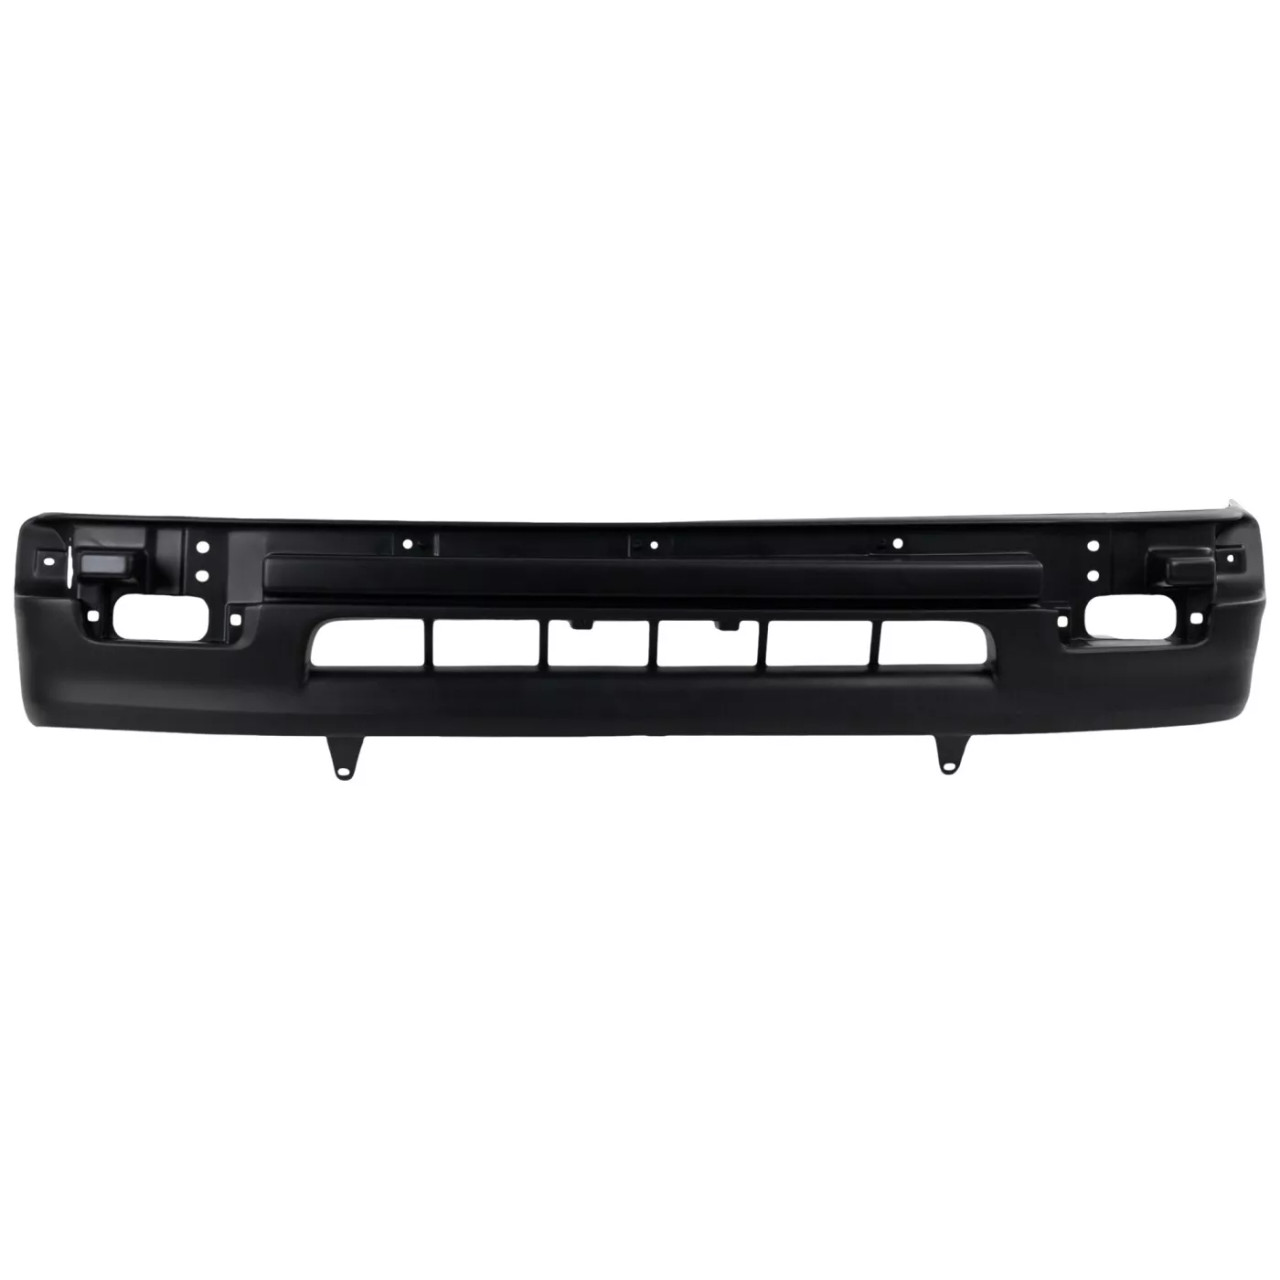 Bumper Cover Kit For 1998-2000 Toyota Tacoma